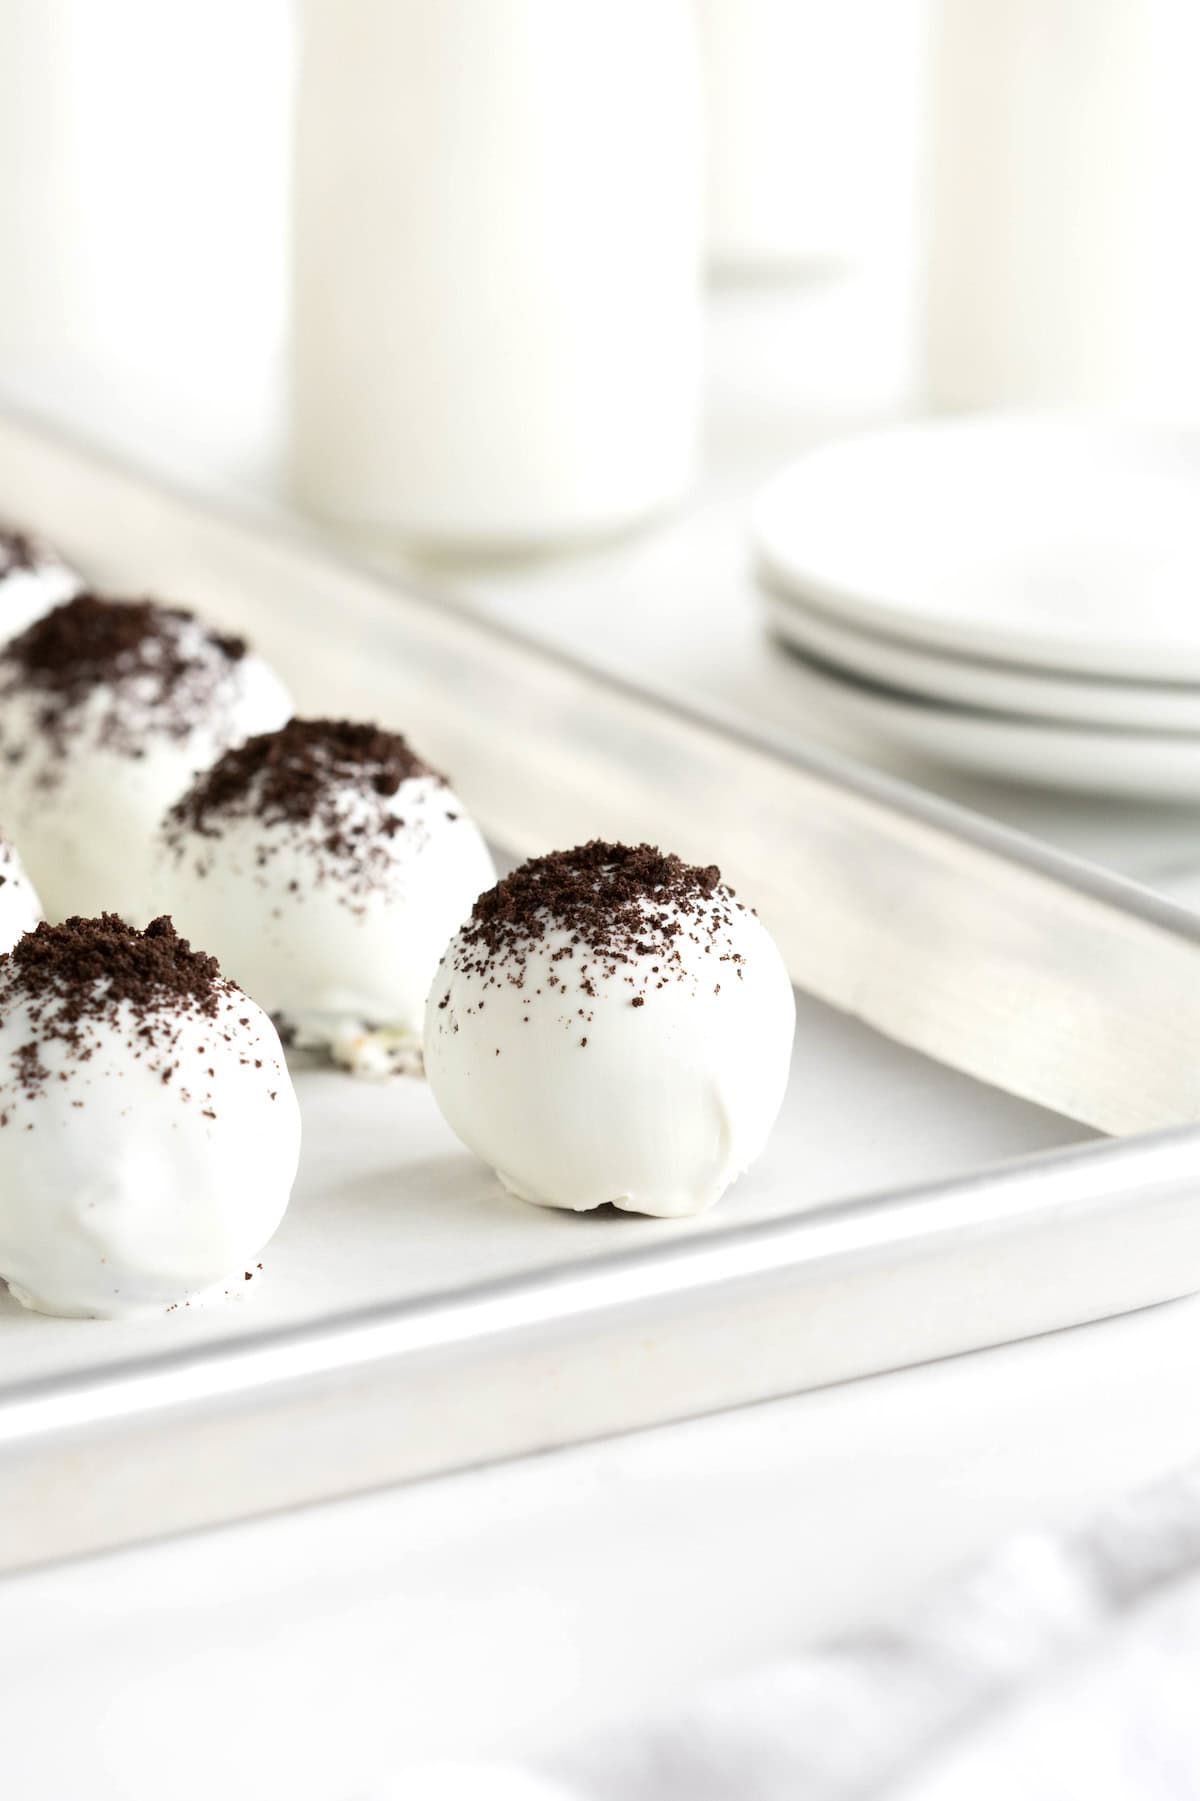 Oreo cake balls on an aluminum baking sheet lined with parchment paper.